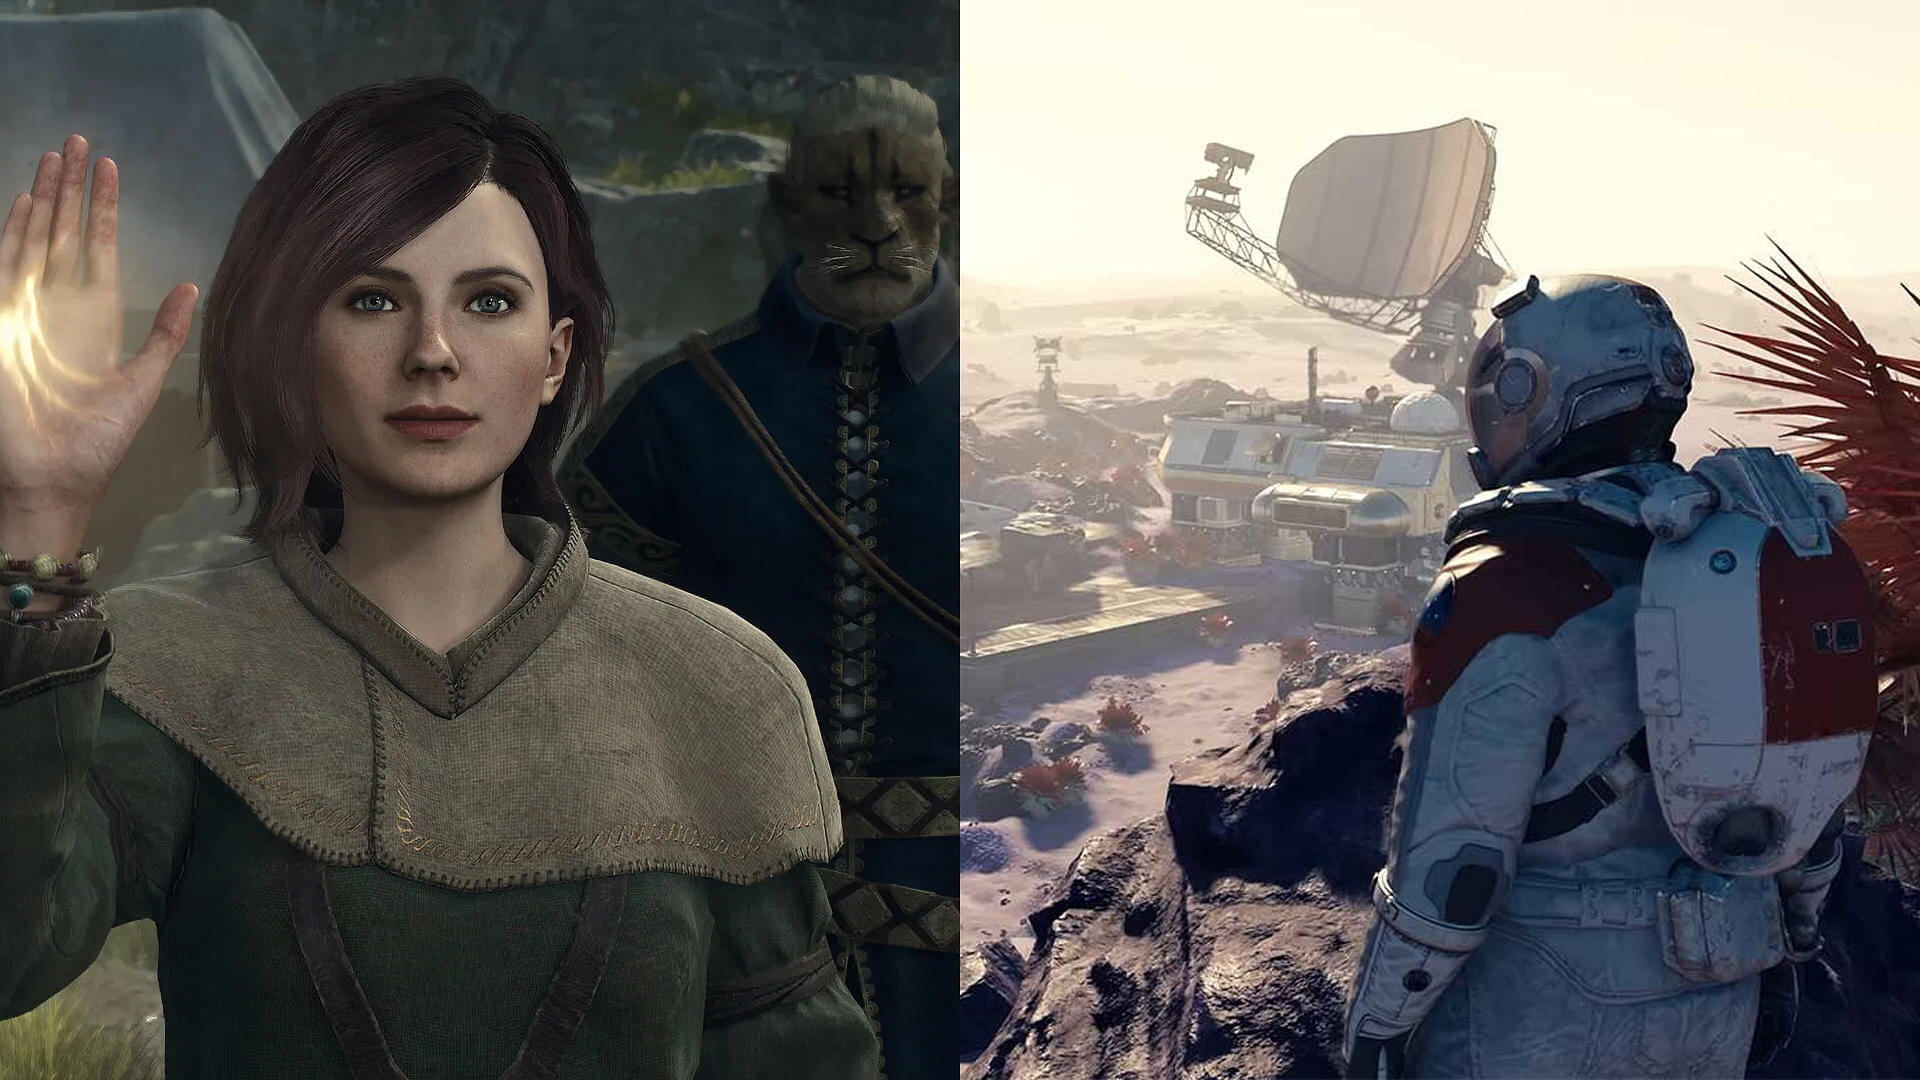 An image showing characters from Dragon's Dogma 2 and Starfield